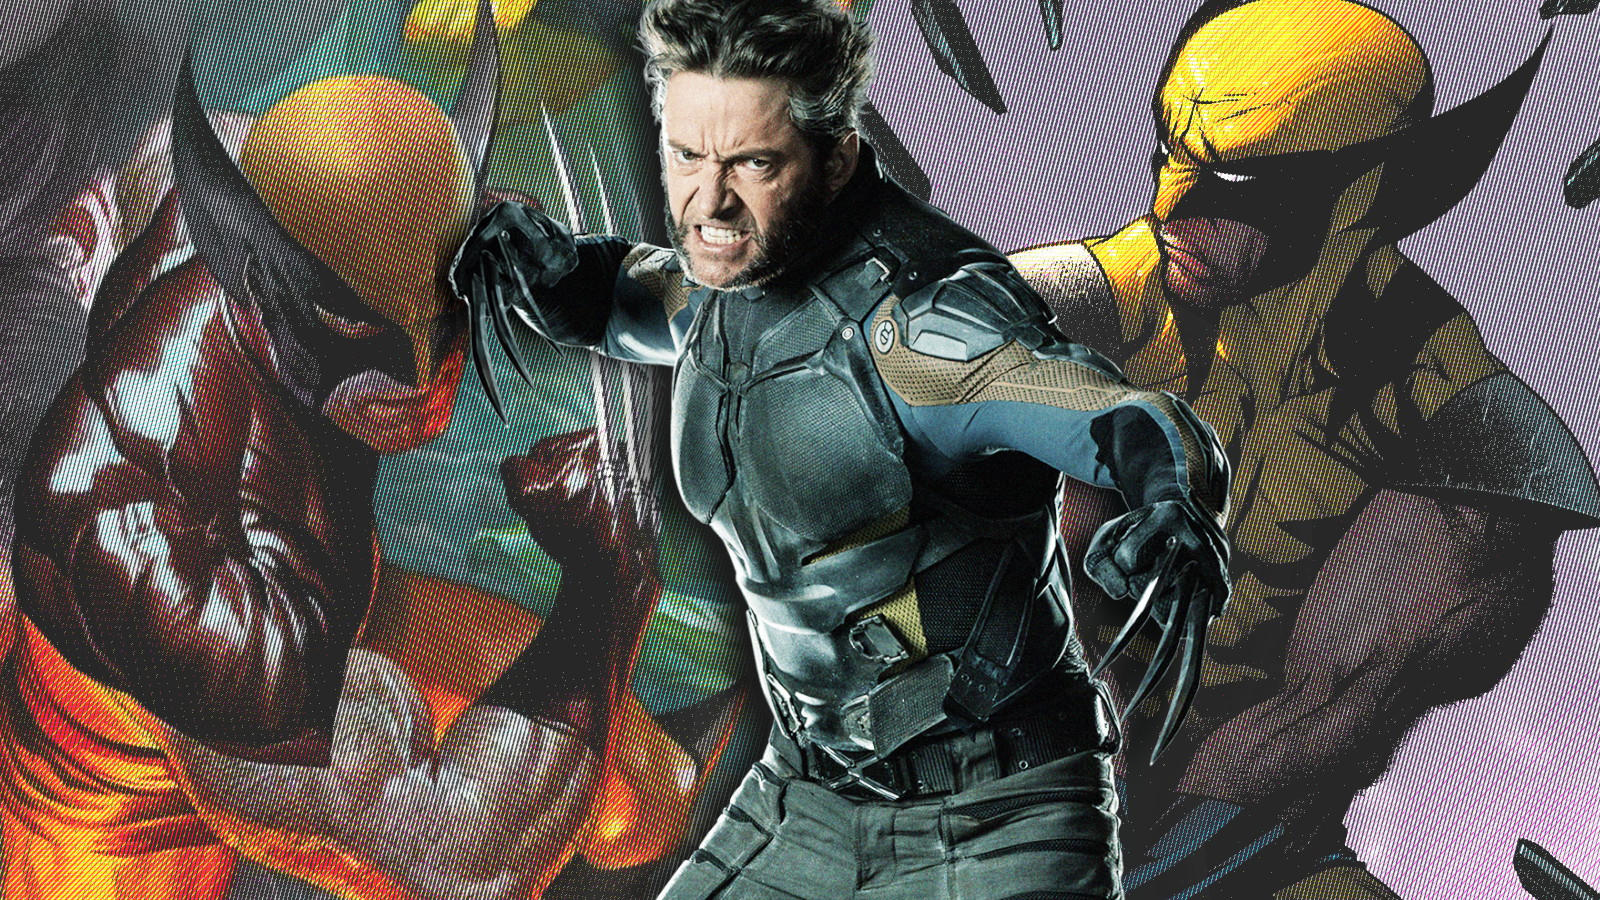 A collage of Wolverine over the years.